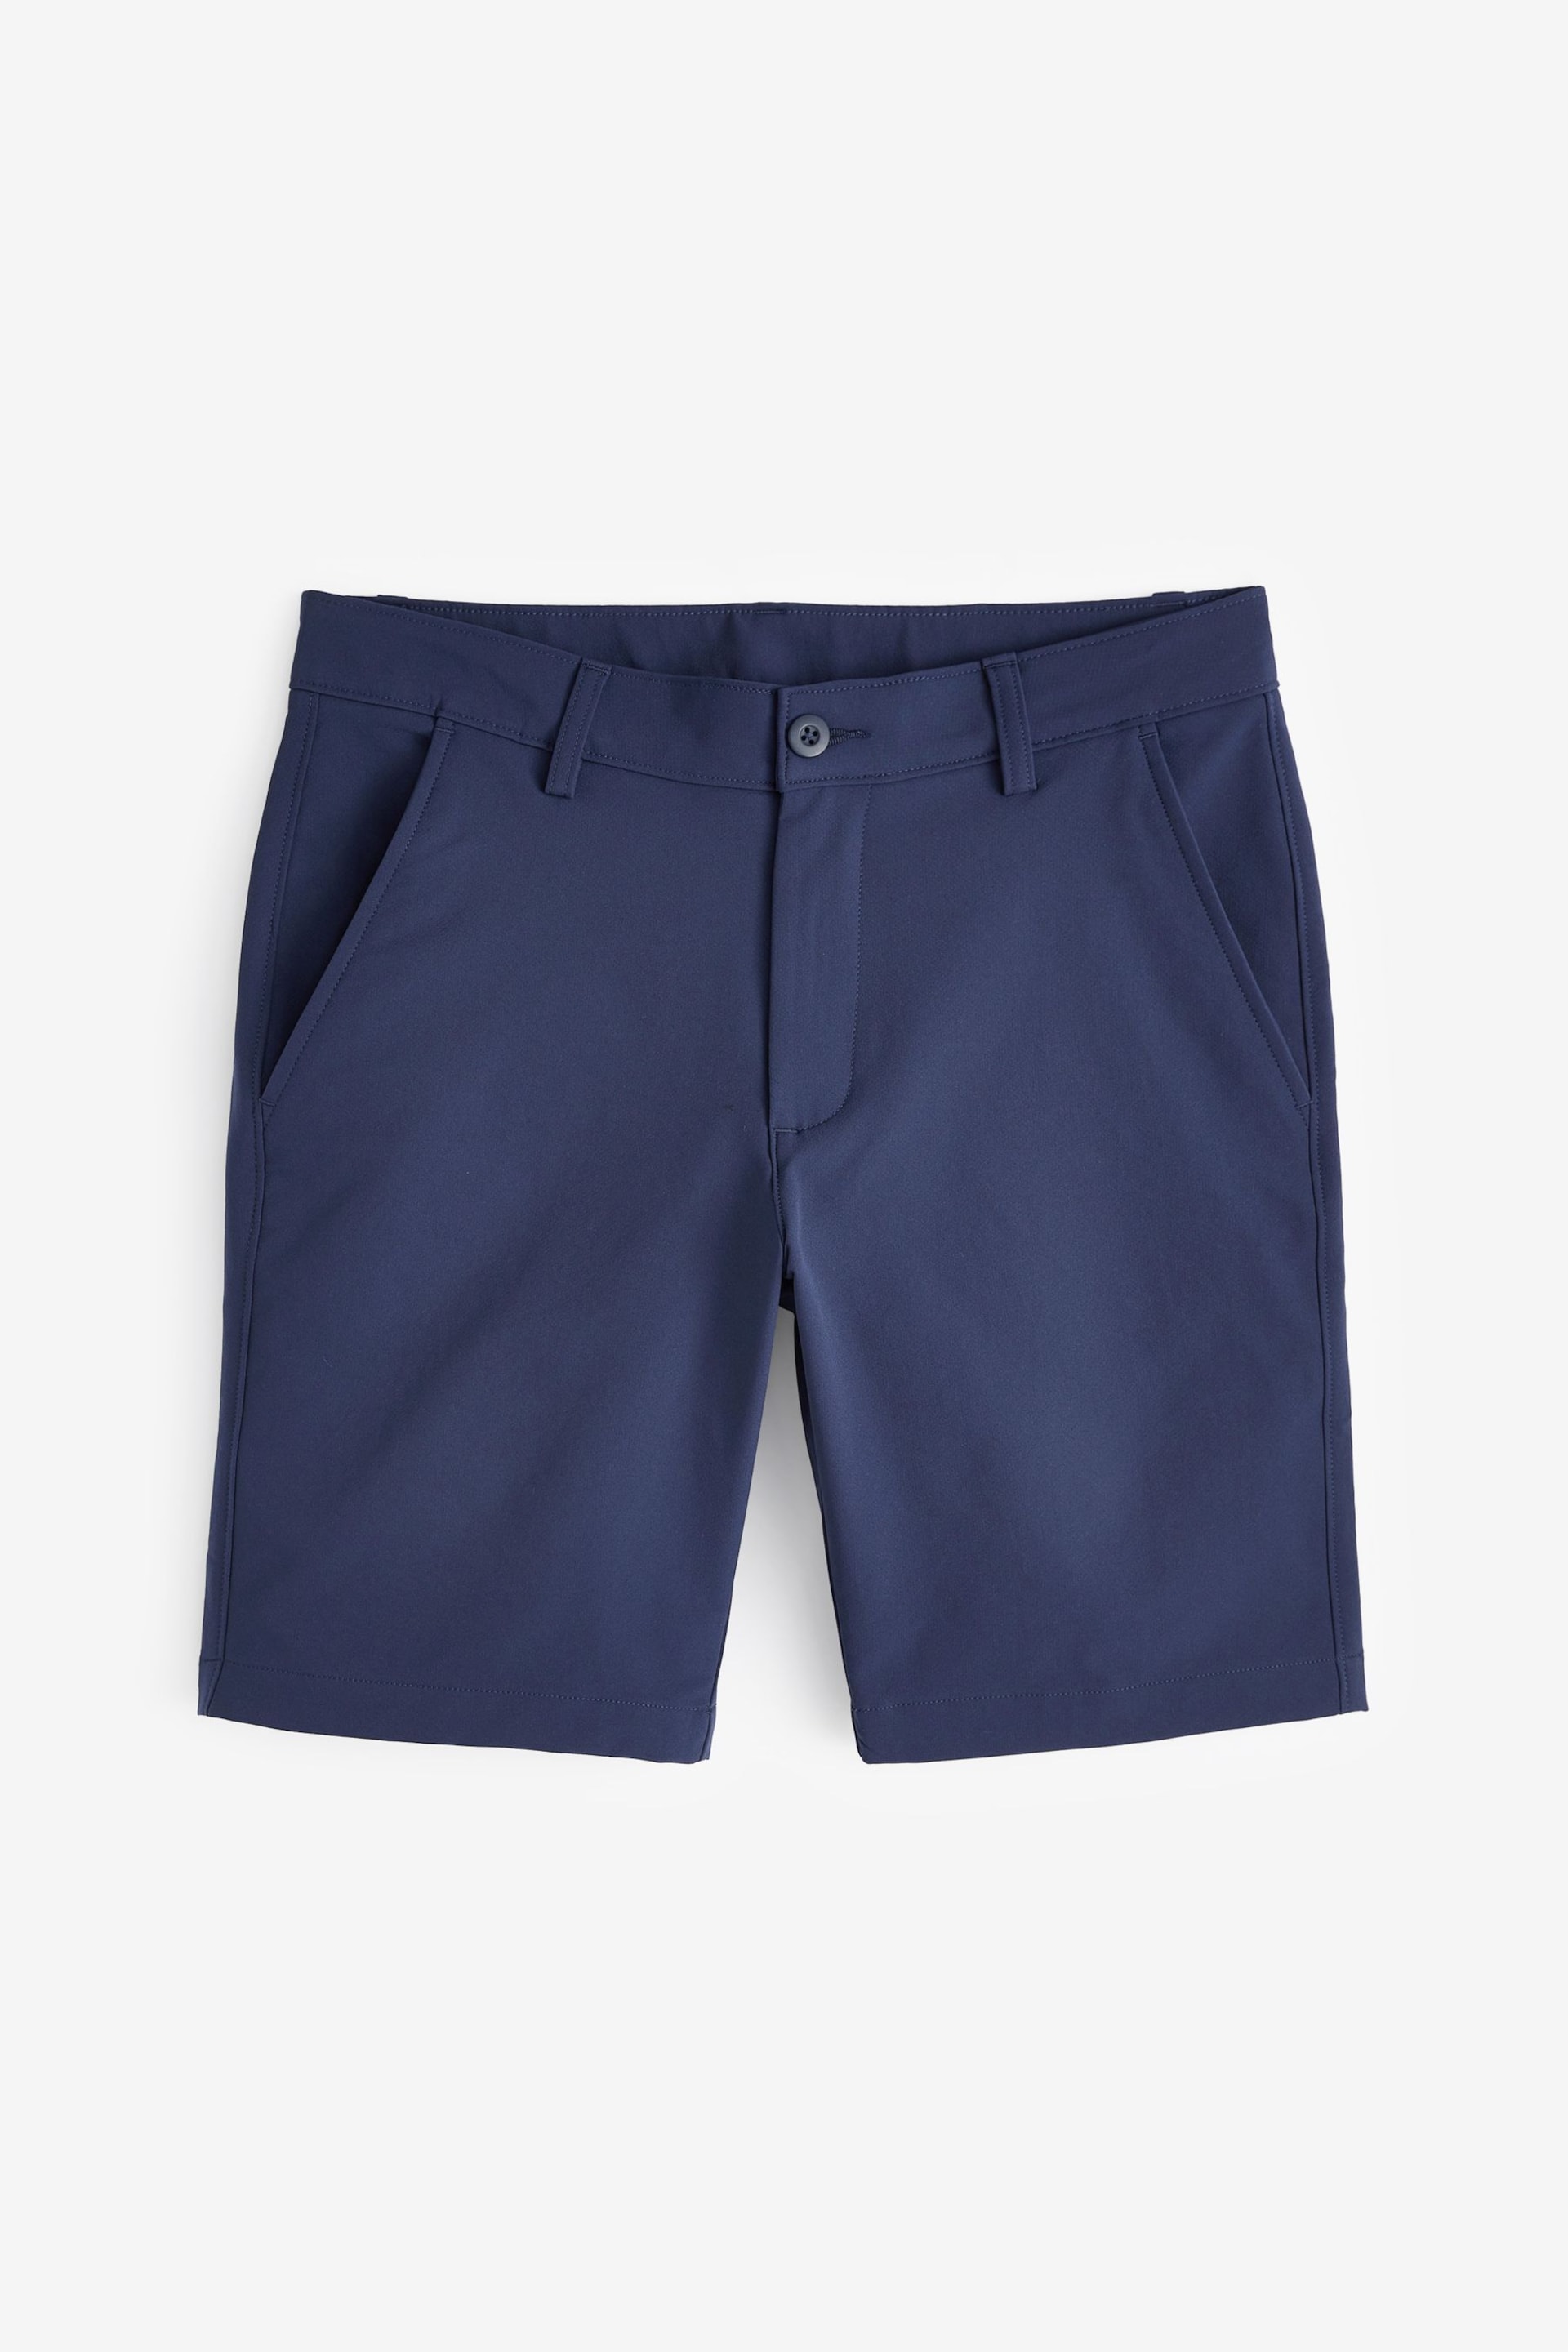 Under Armour Navy Golf Tech Taper Shorts - Image 5 of 5